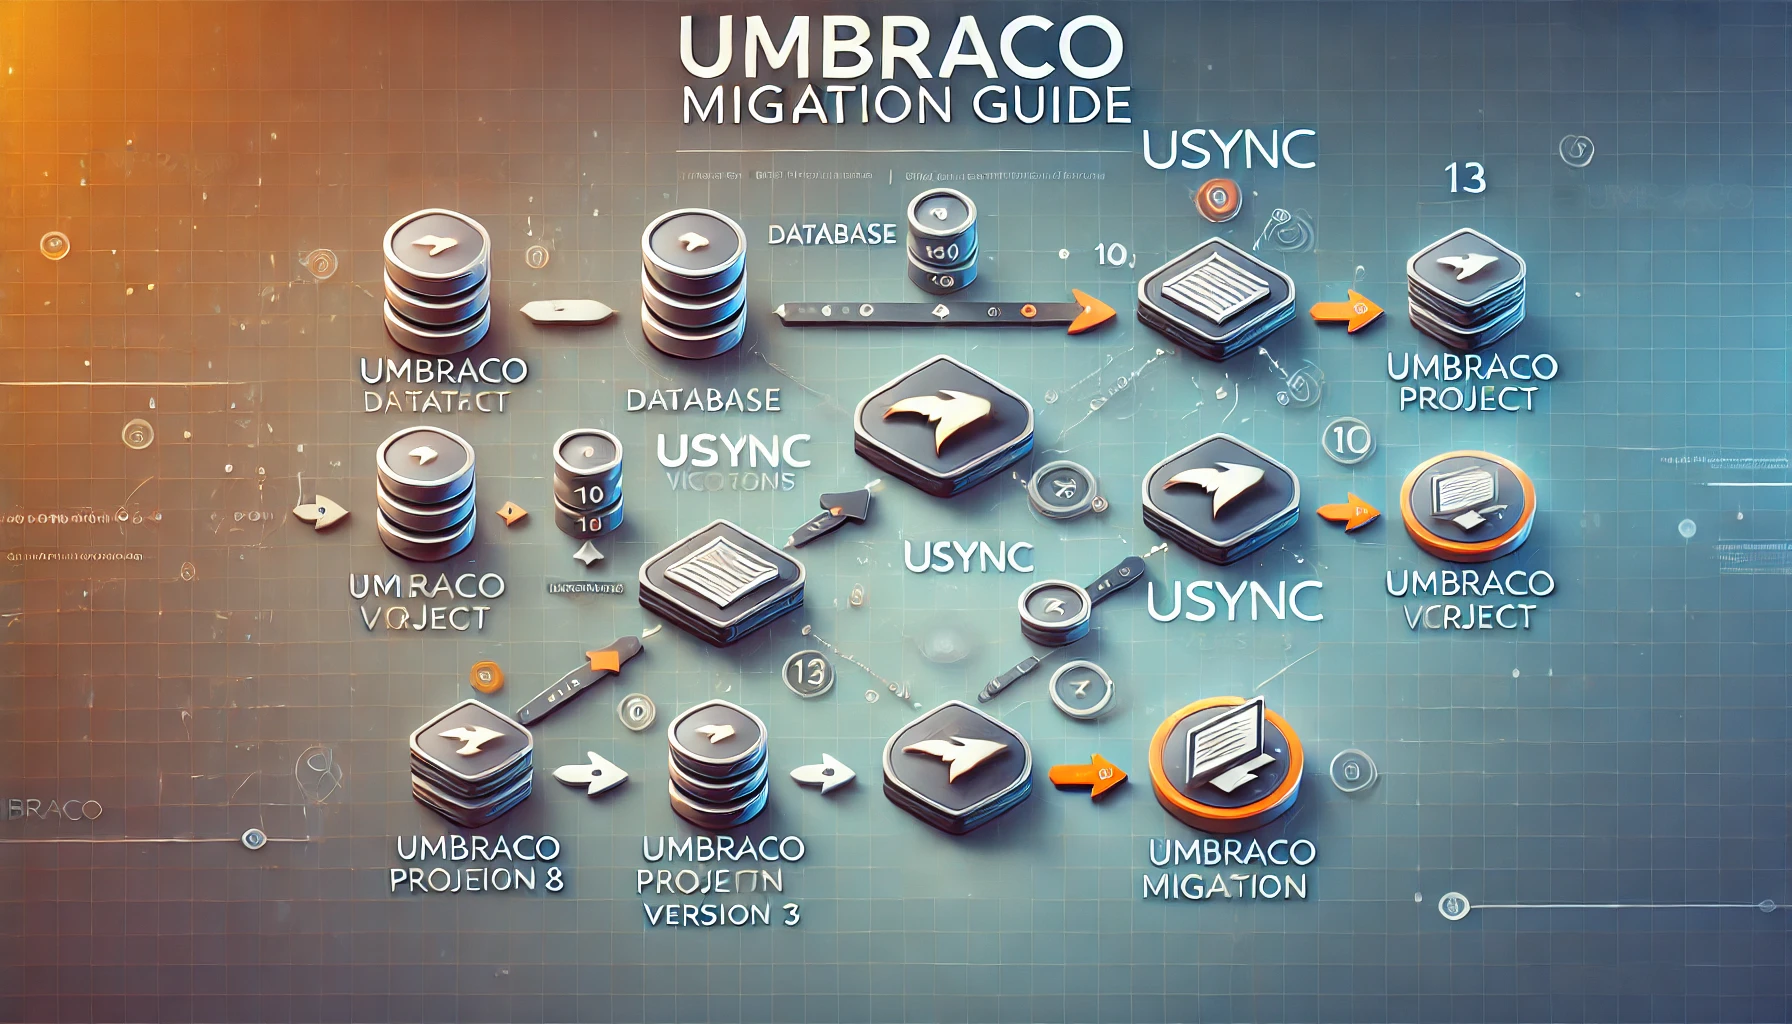 Image of  migration Of An Umbraco Project From Version 8 To Version 13.